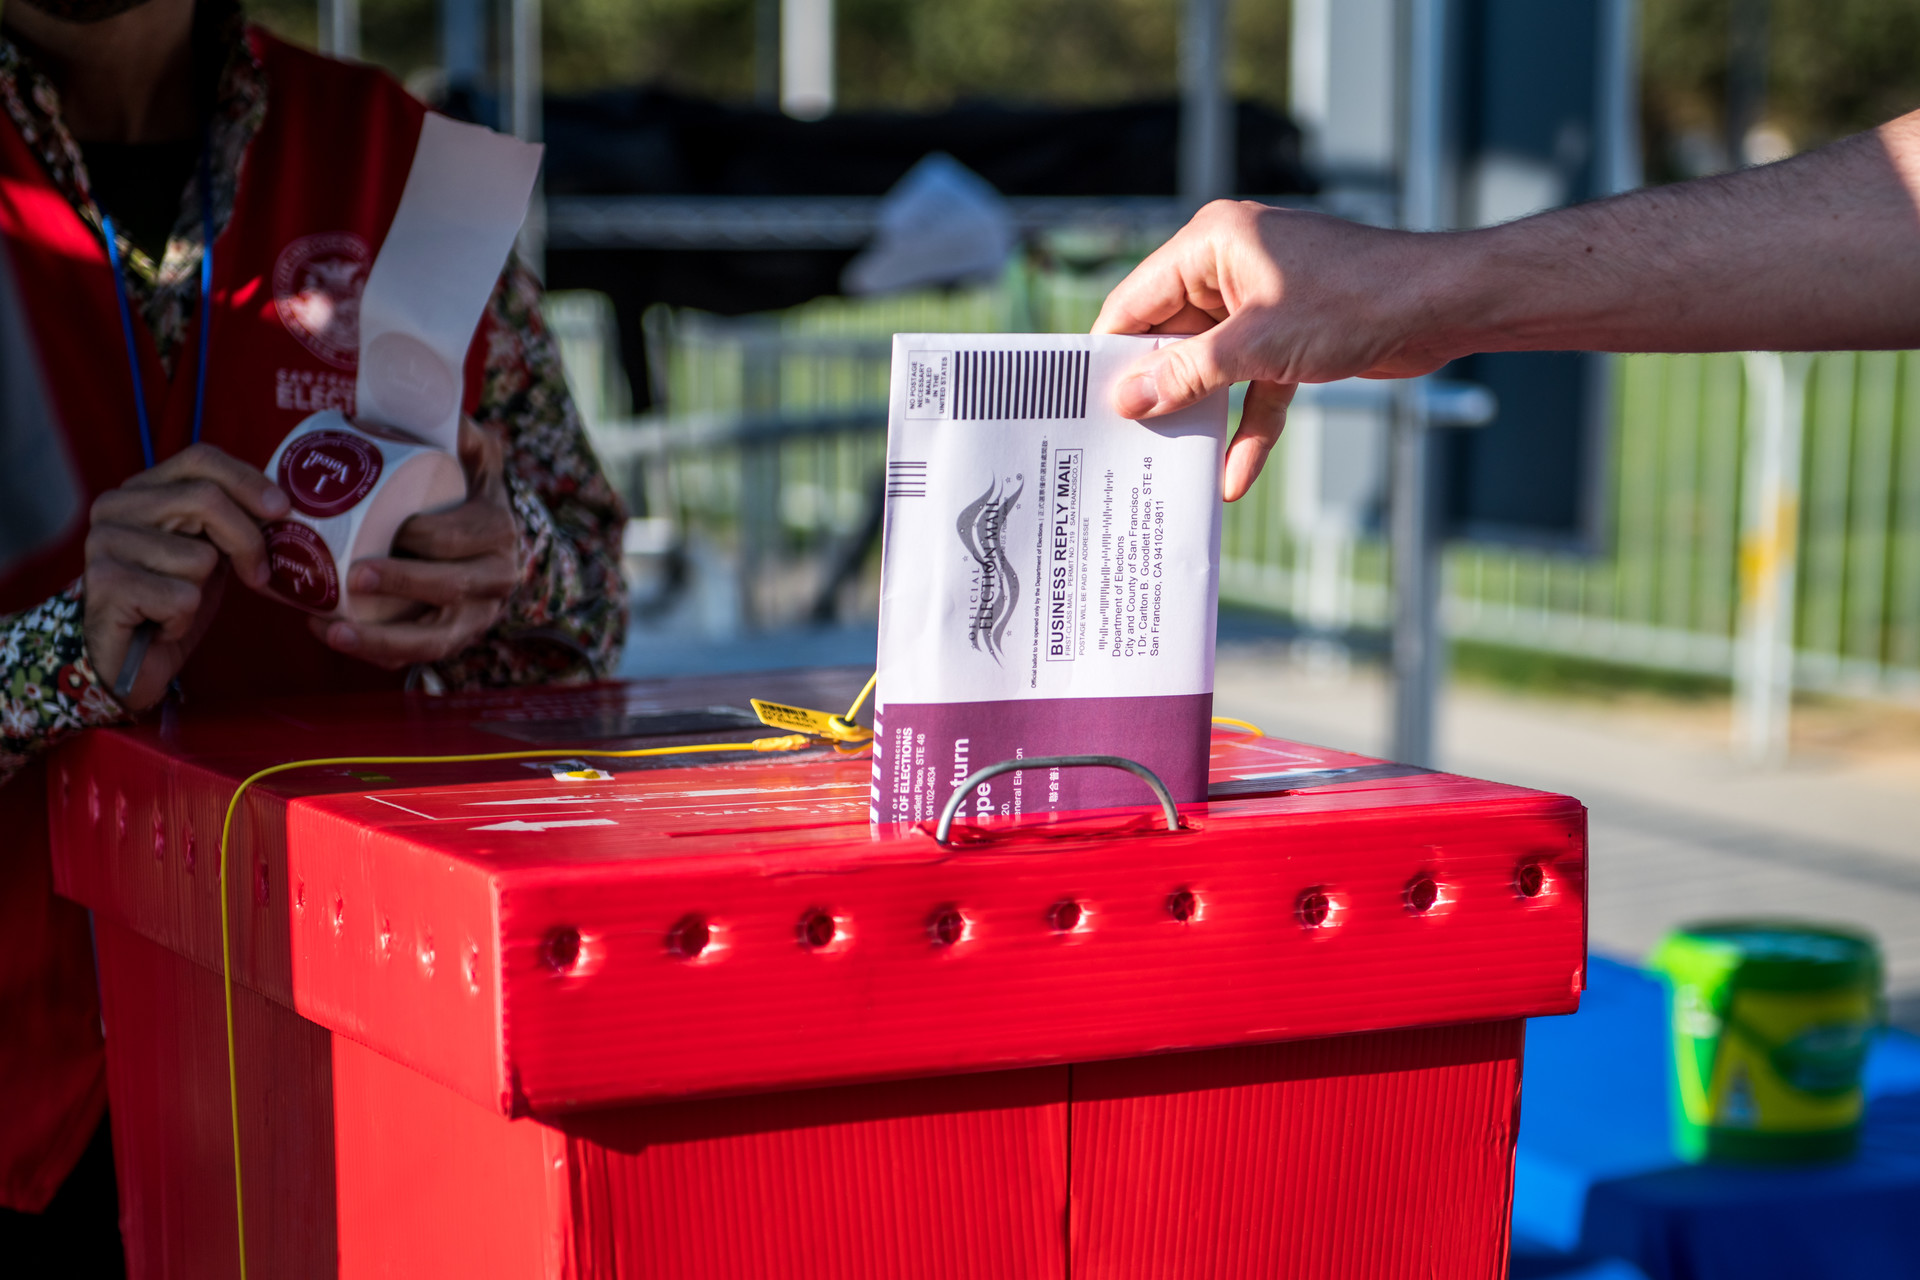 A voter's hand drops a completed Election 2020 ballot into a secure drop box as a poll worker watches